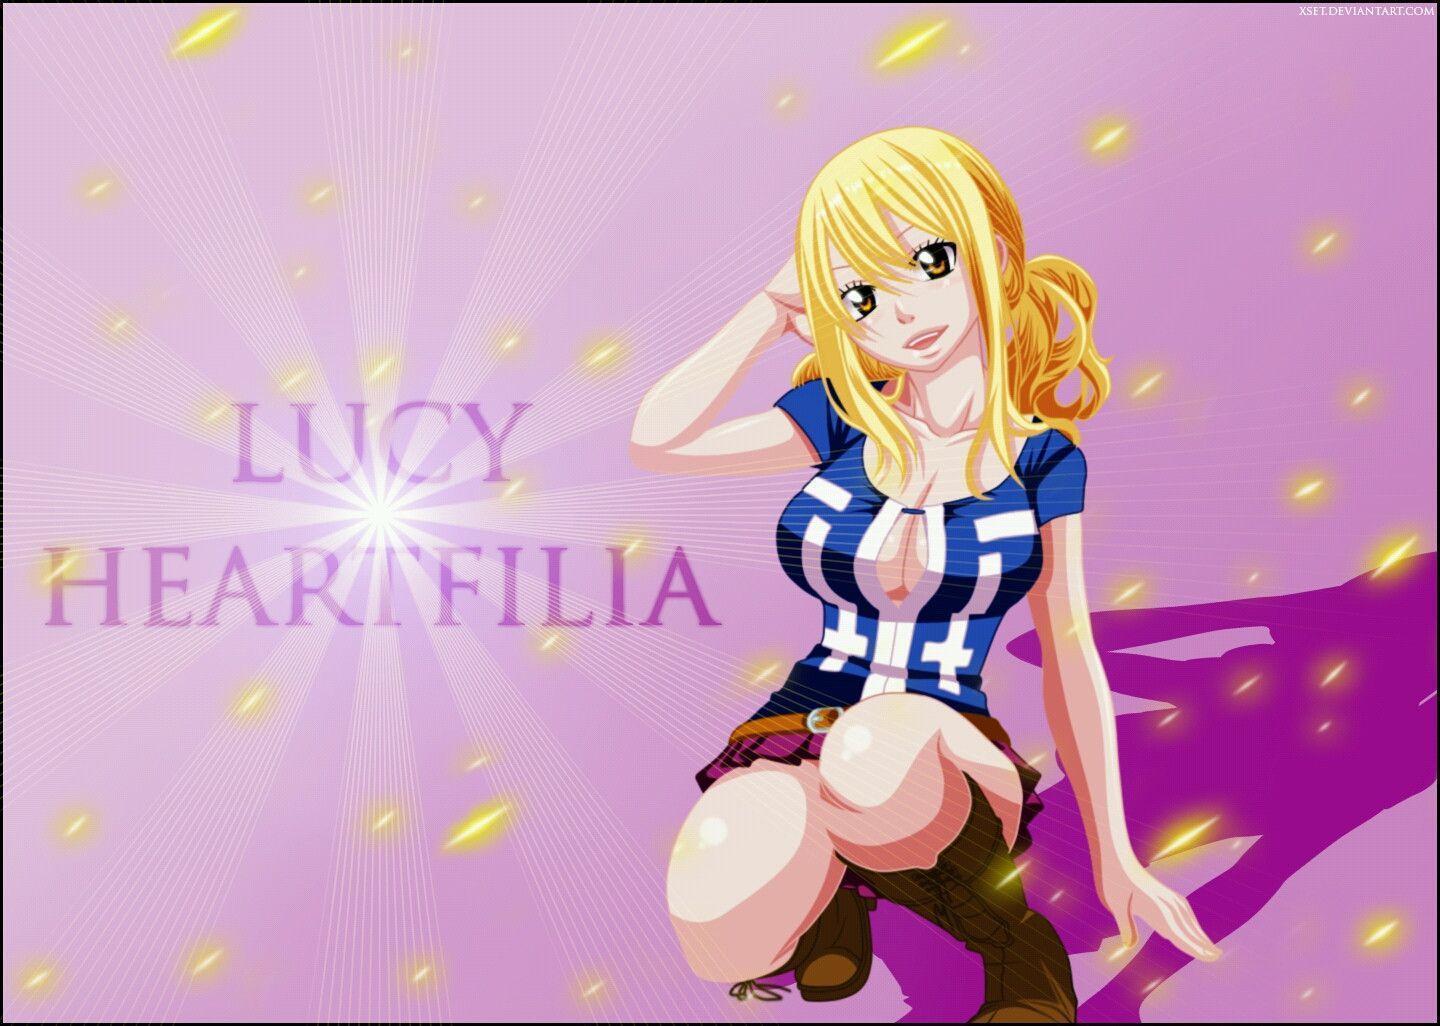 Download Anime Fairy Tail Girls Wallpaper 1440x1026. HD